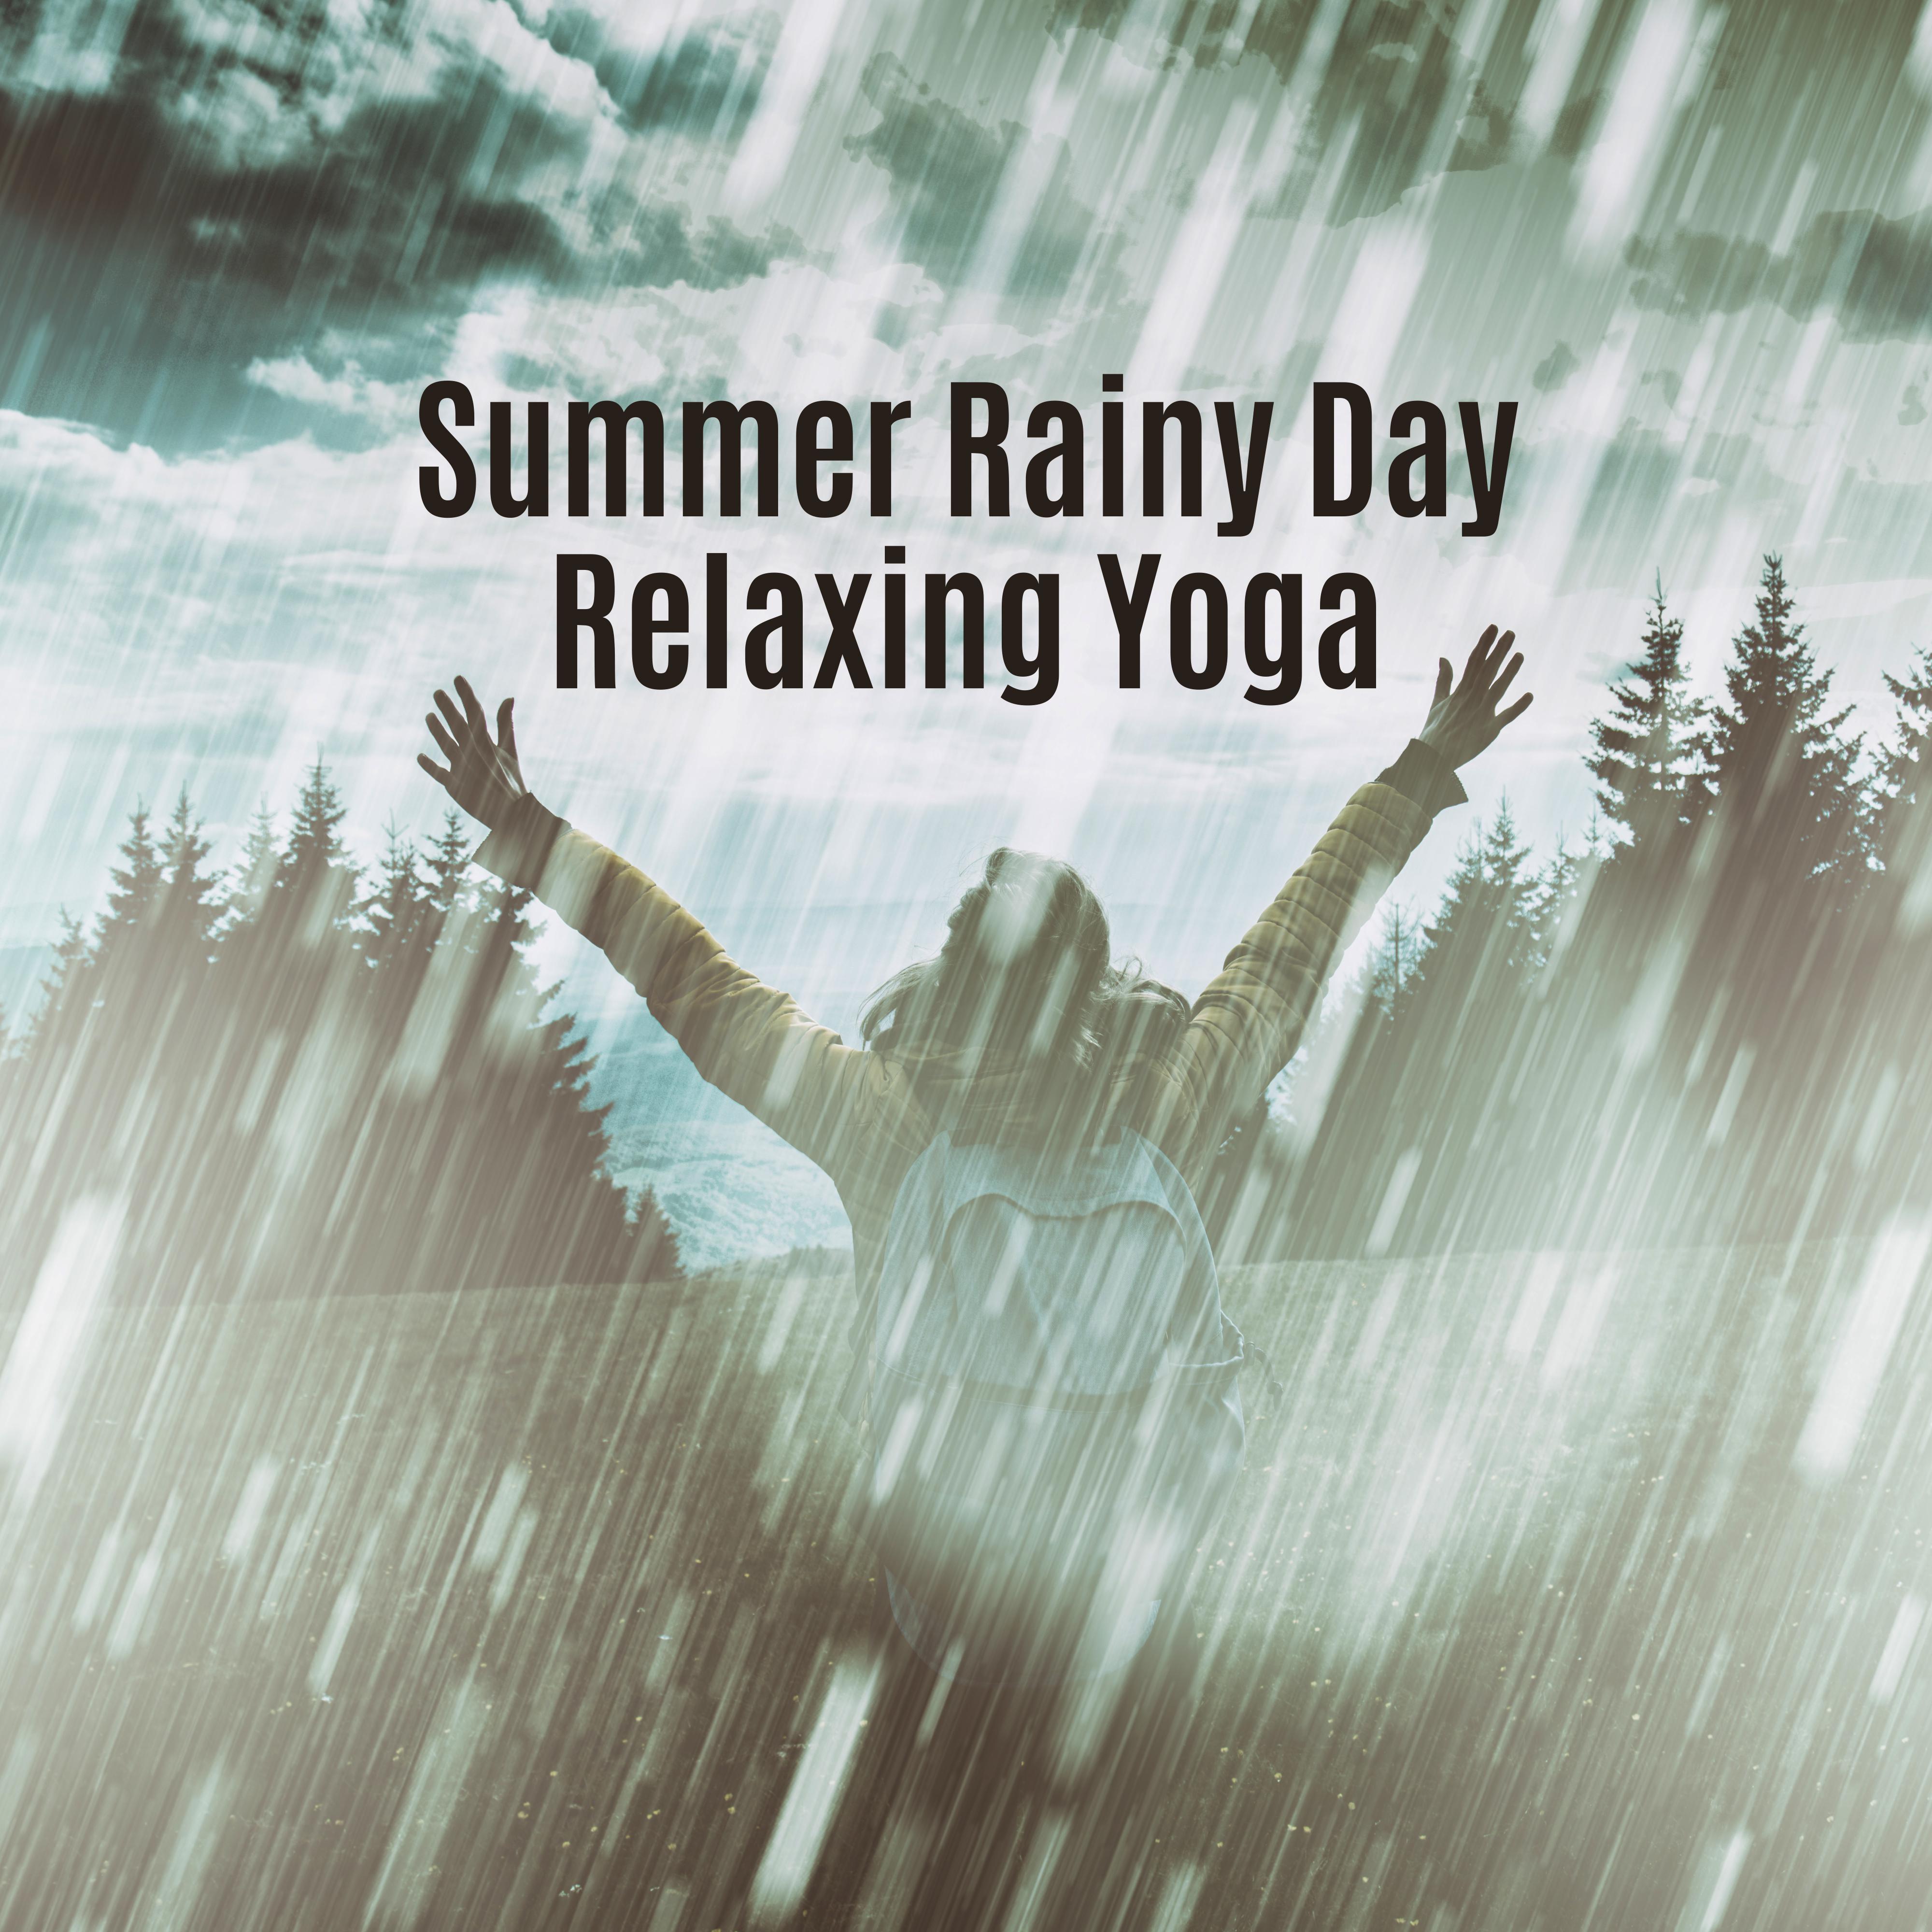 Summer Rainy Day Relaxing Yoga: 2019 New Age Music Selection Created to Best Meditation & Relaxation, Fight with Bad Mood, De-stress, Calm Down, Relax Your Body & Mind